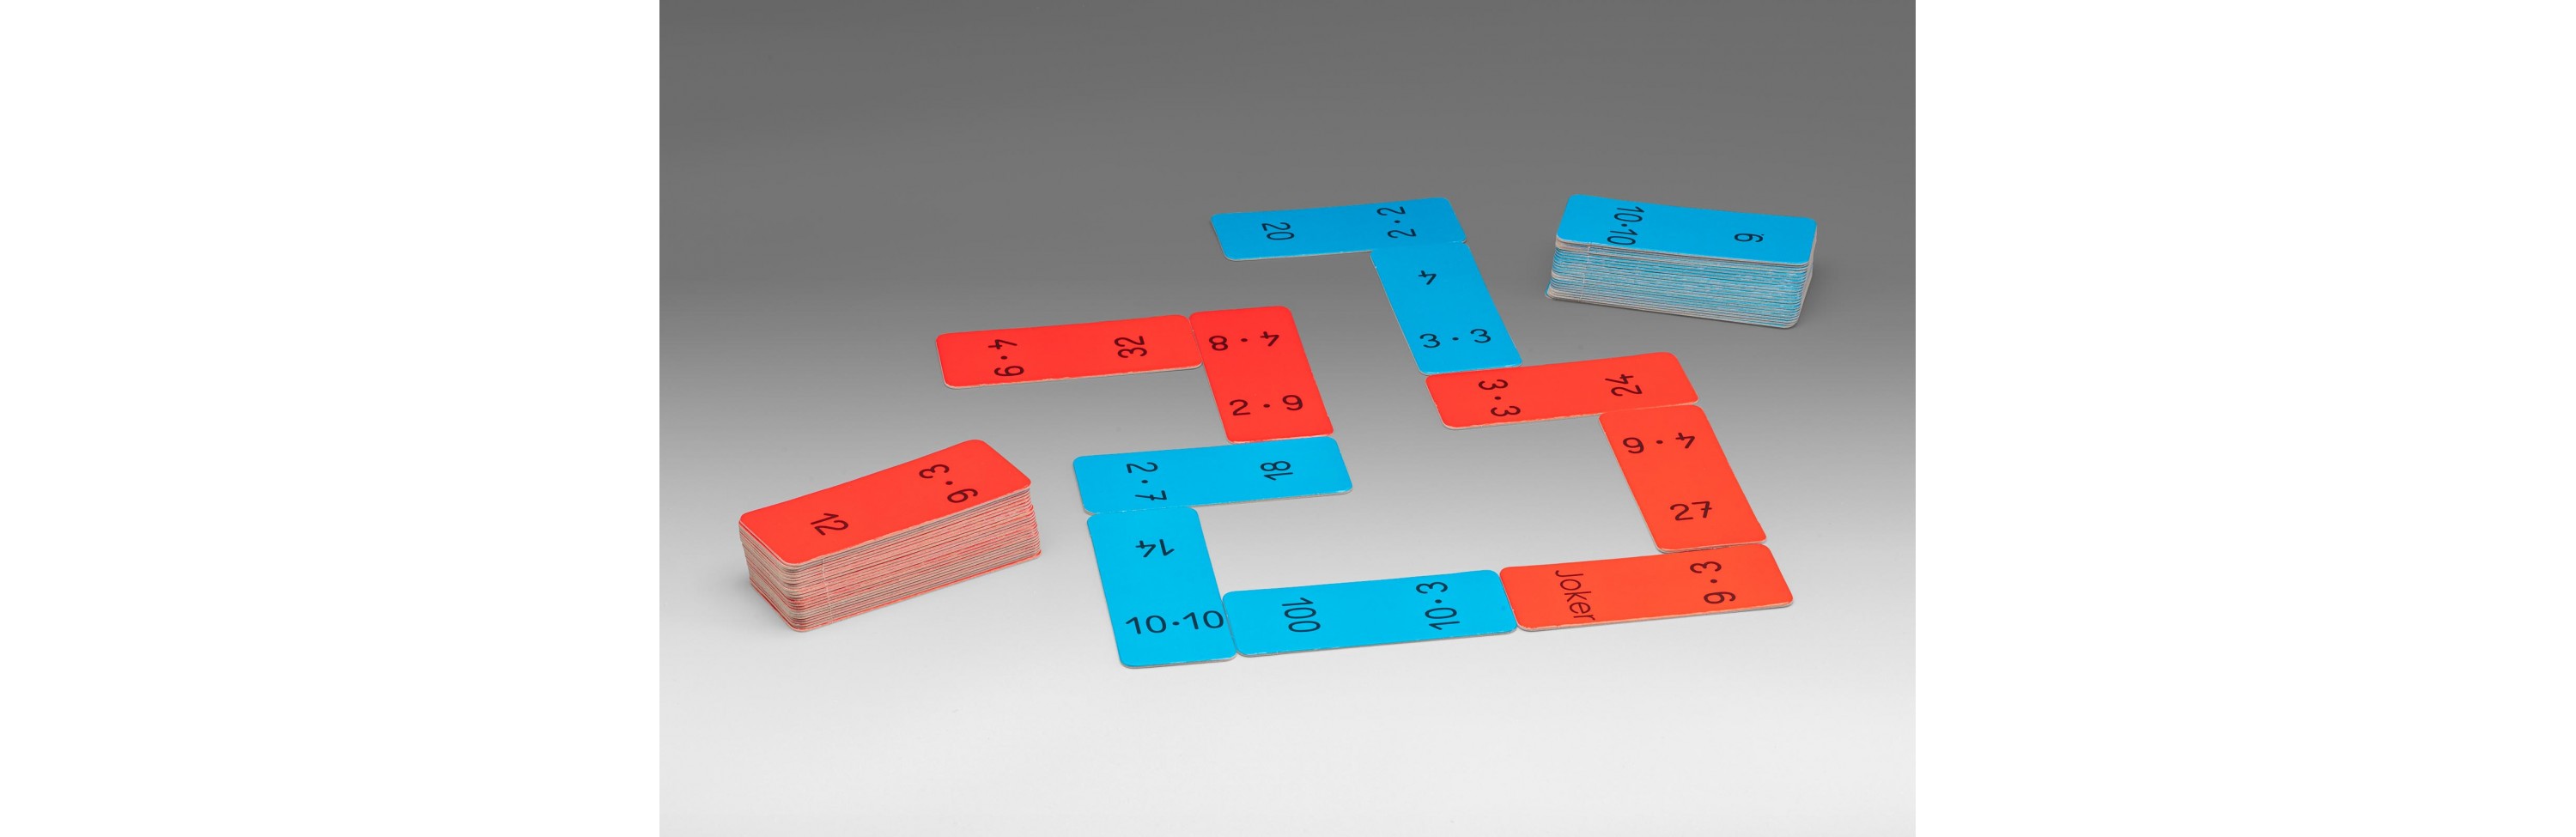 Wissner® active learning - Domino Game Multiplication in the 100 number range